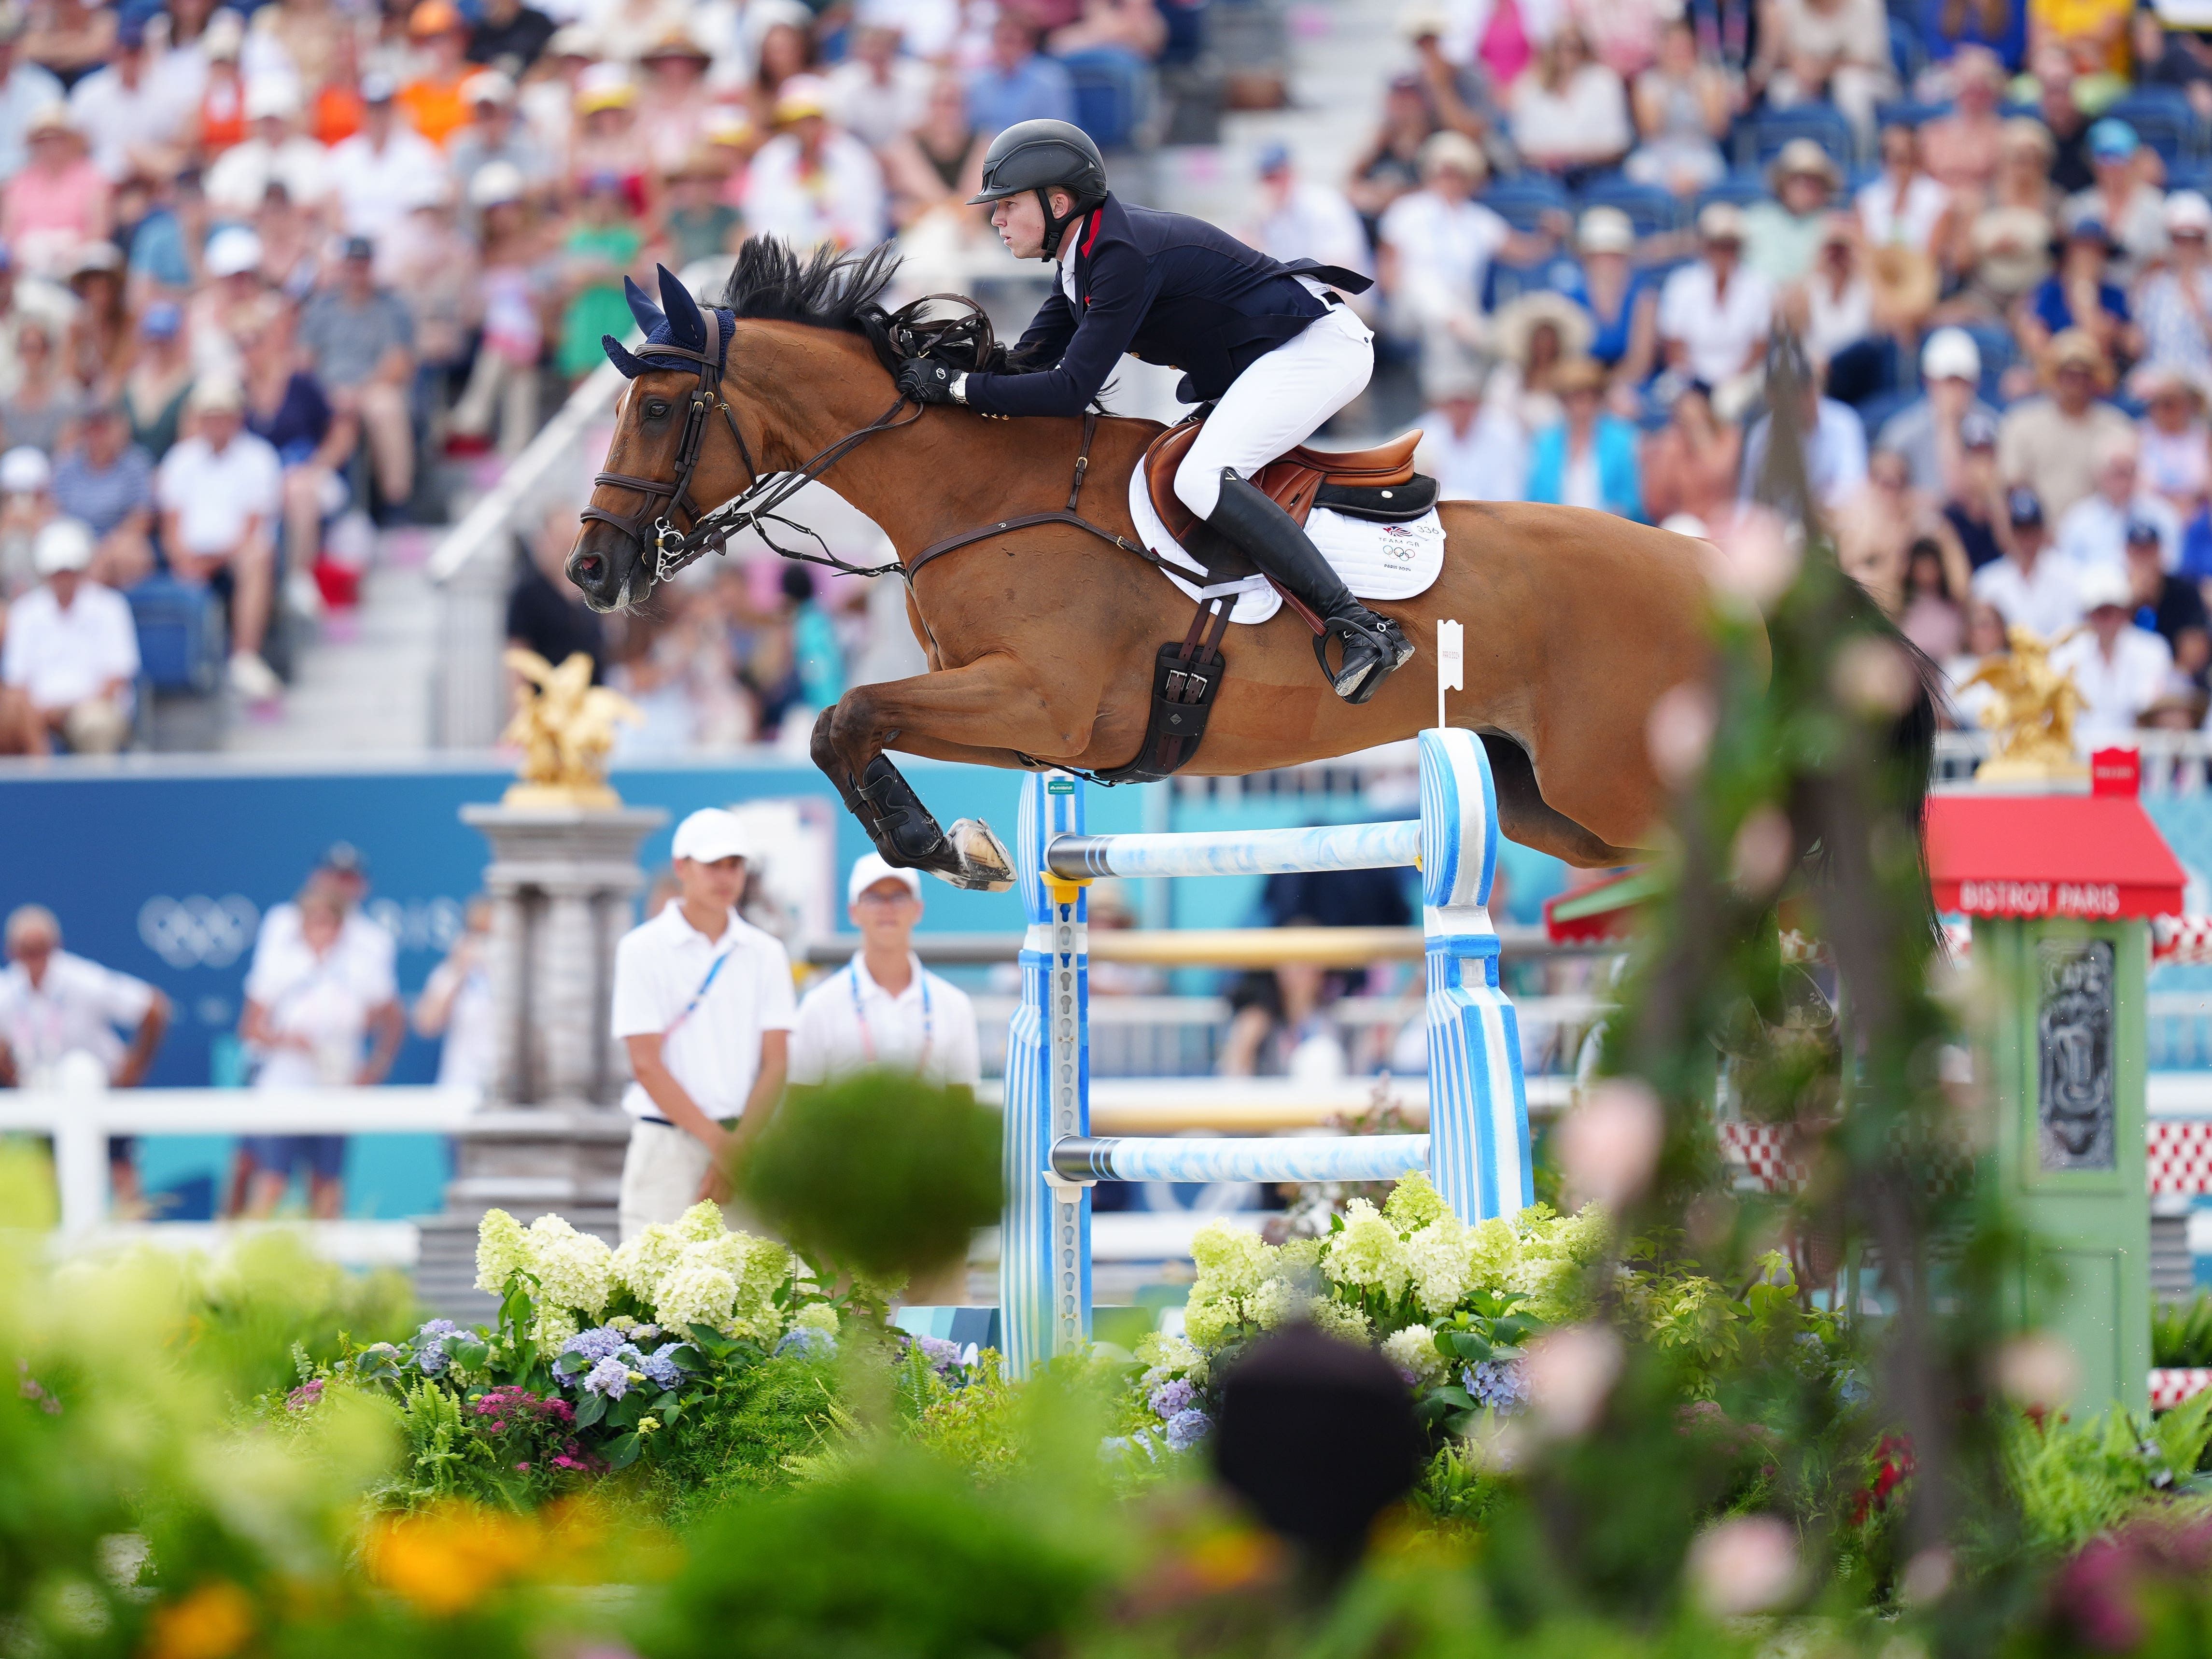 Scott Brash, Ben Maher and Harry Charles win jumping team gold for Great Britain